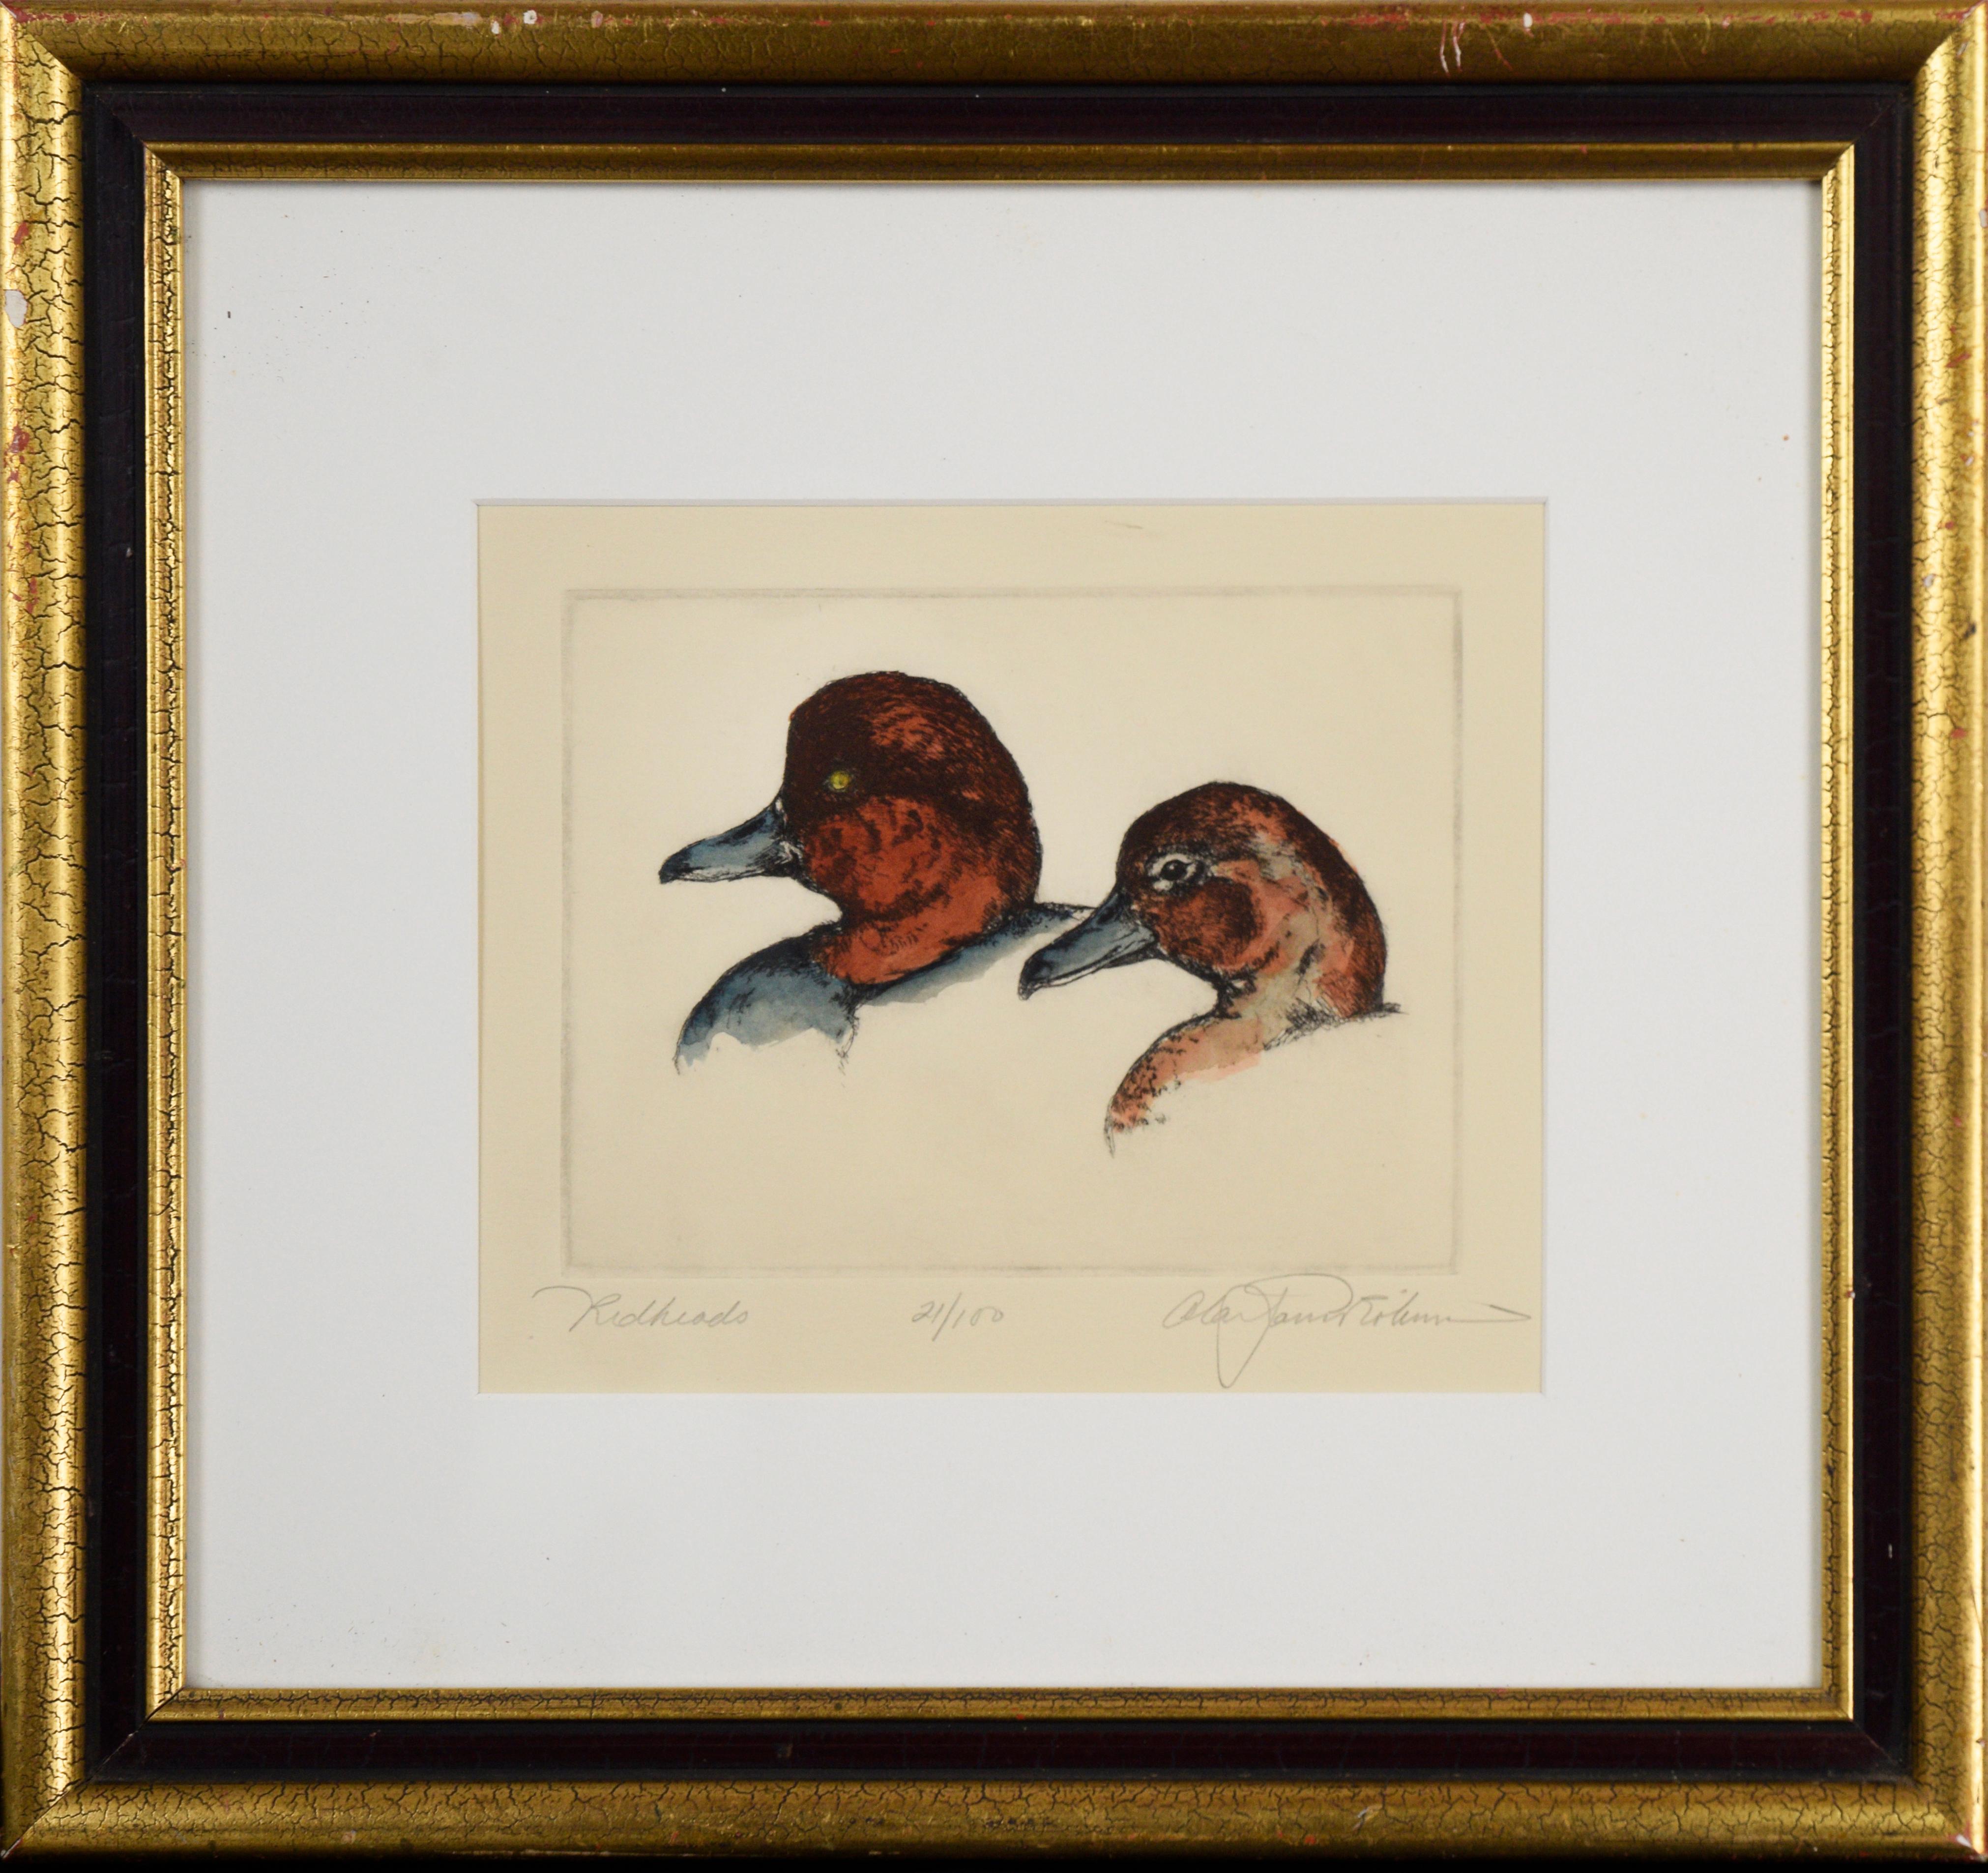 Alan James Robinson Animal Art - "Redheads" - Original Watercolor and Etching on Paper